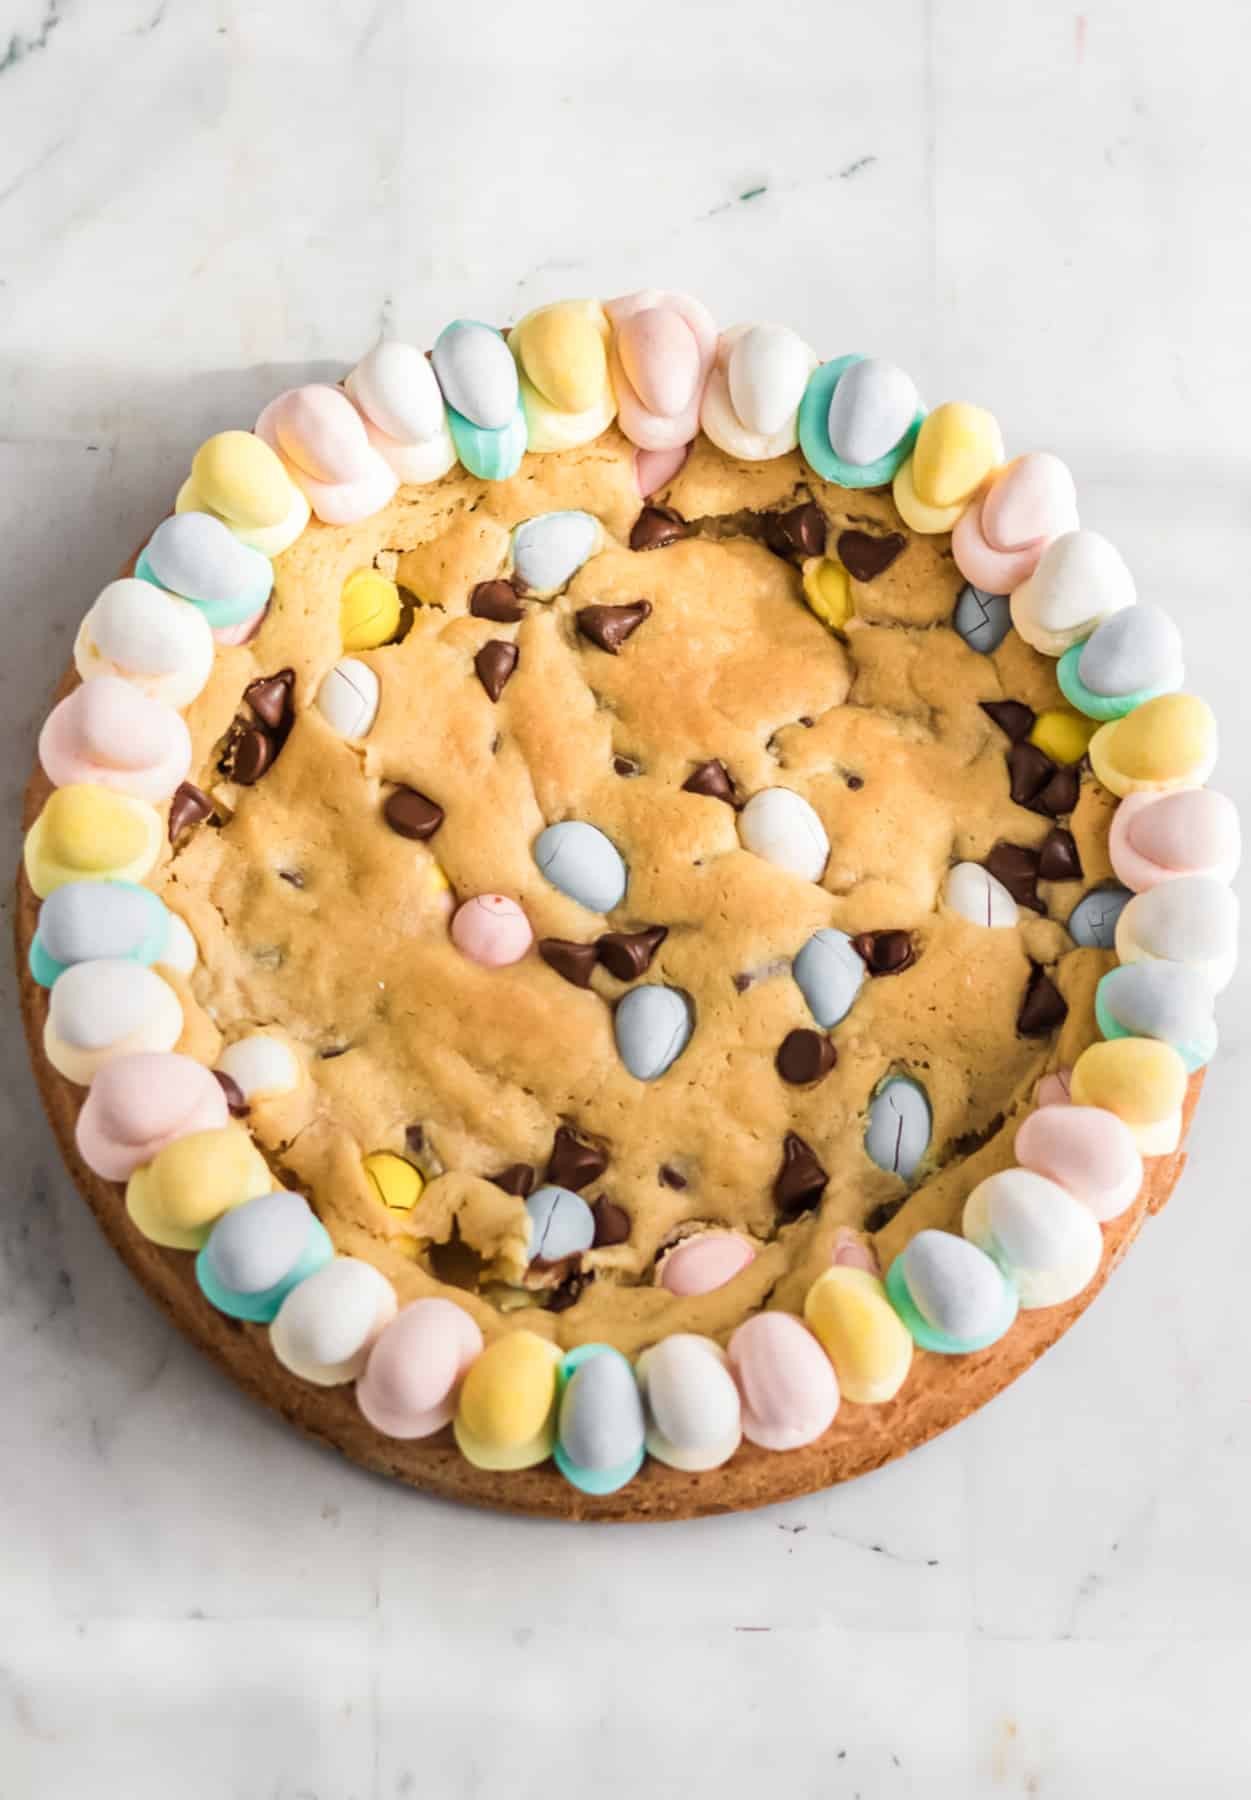 Chocolate mini egg cookie cake decorated with frosting and colored chocolate eggs around the edge for Easter.